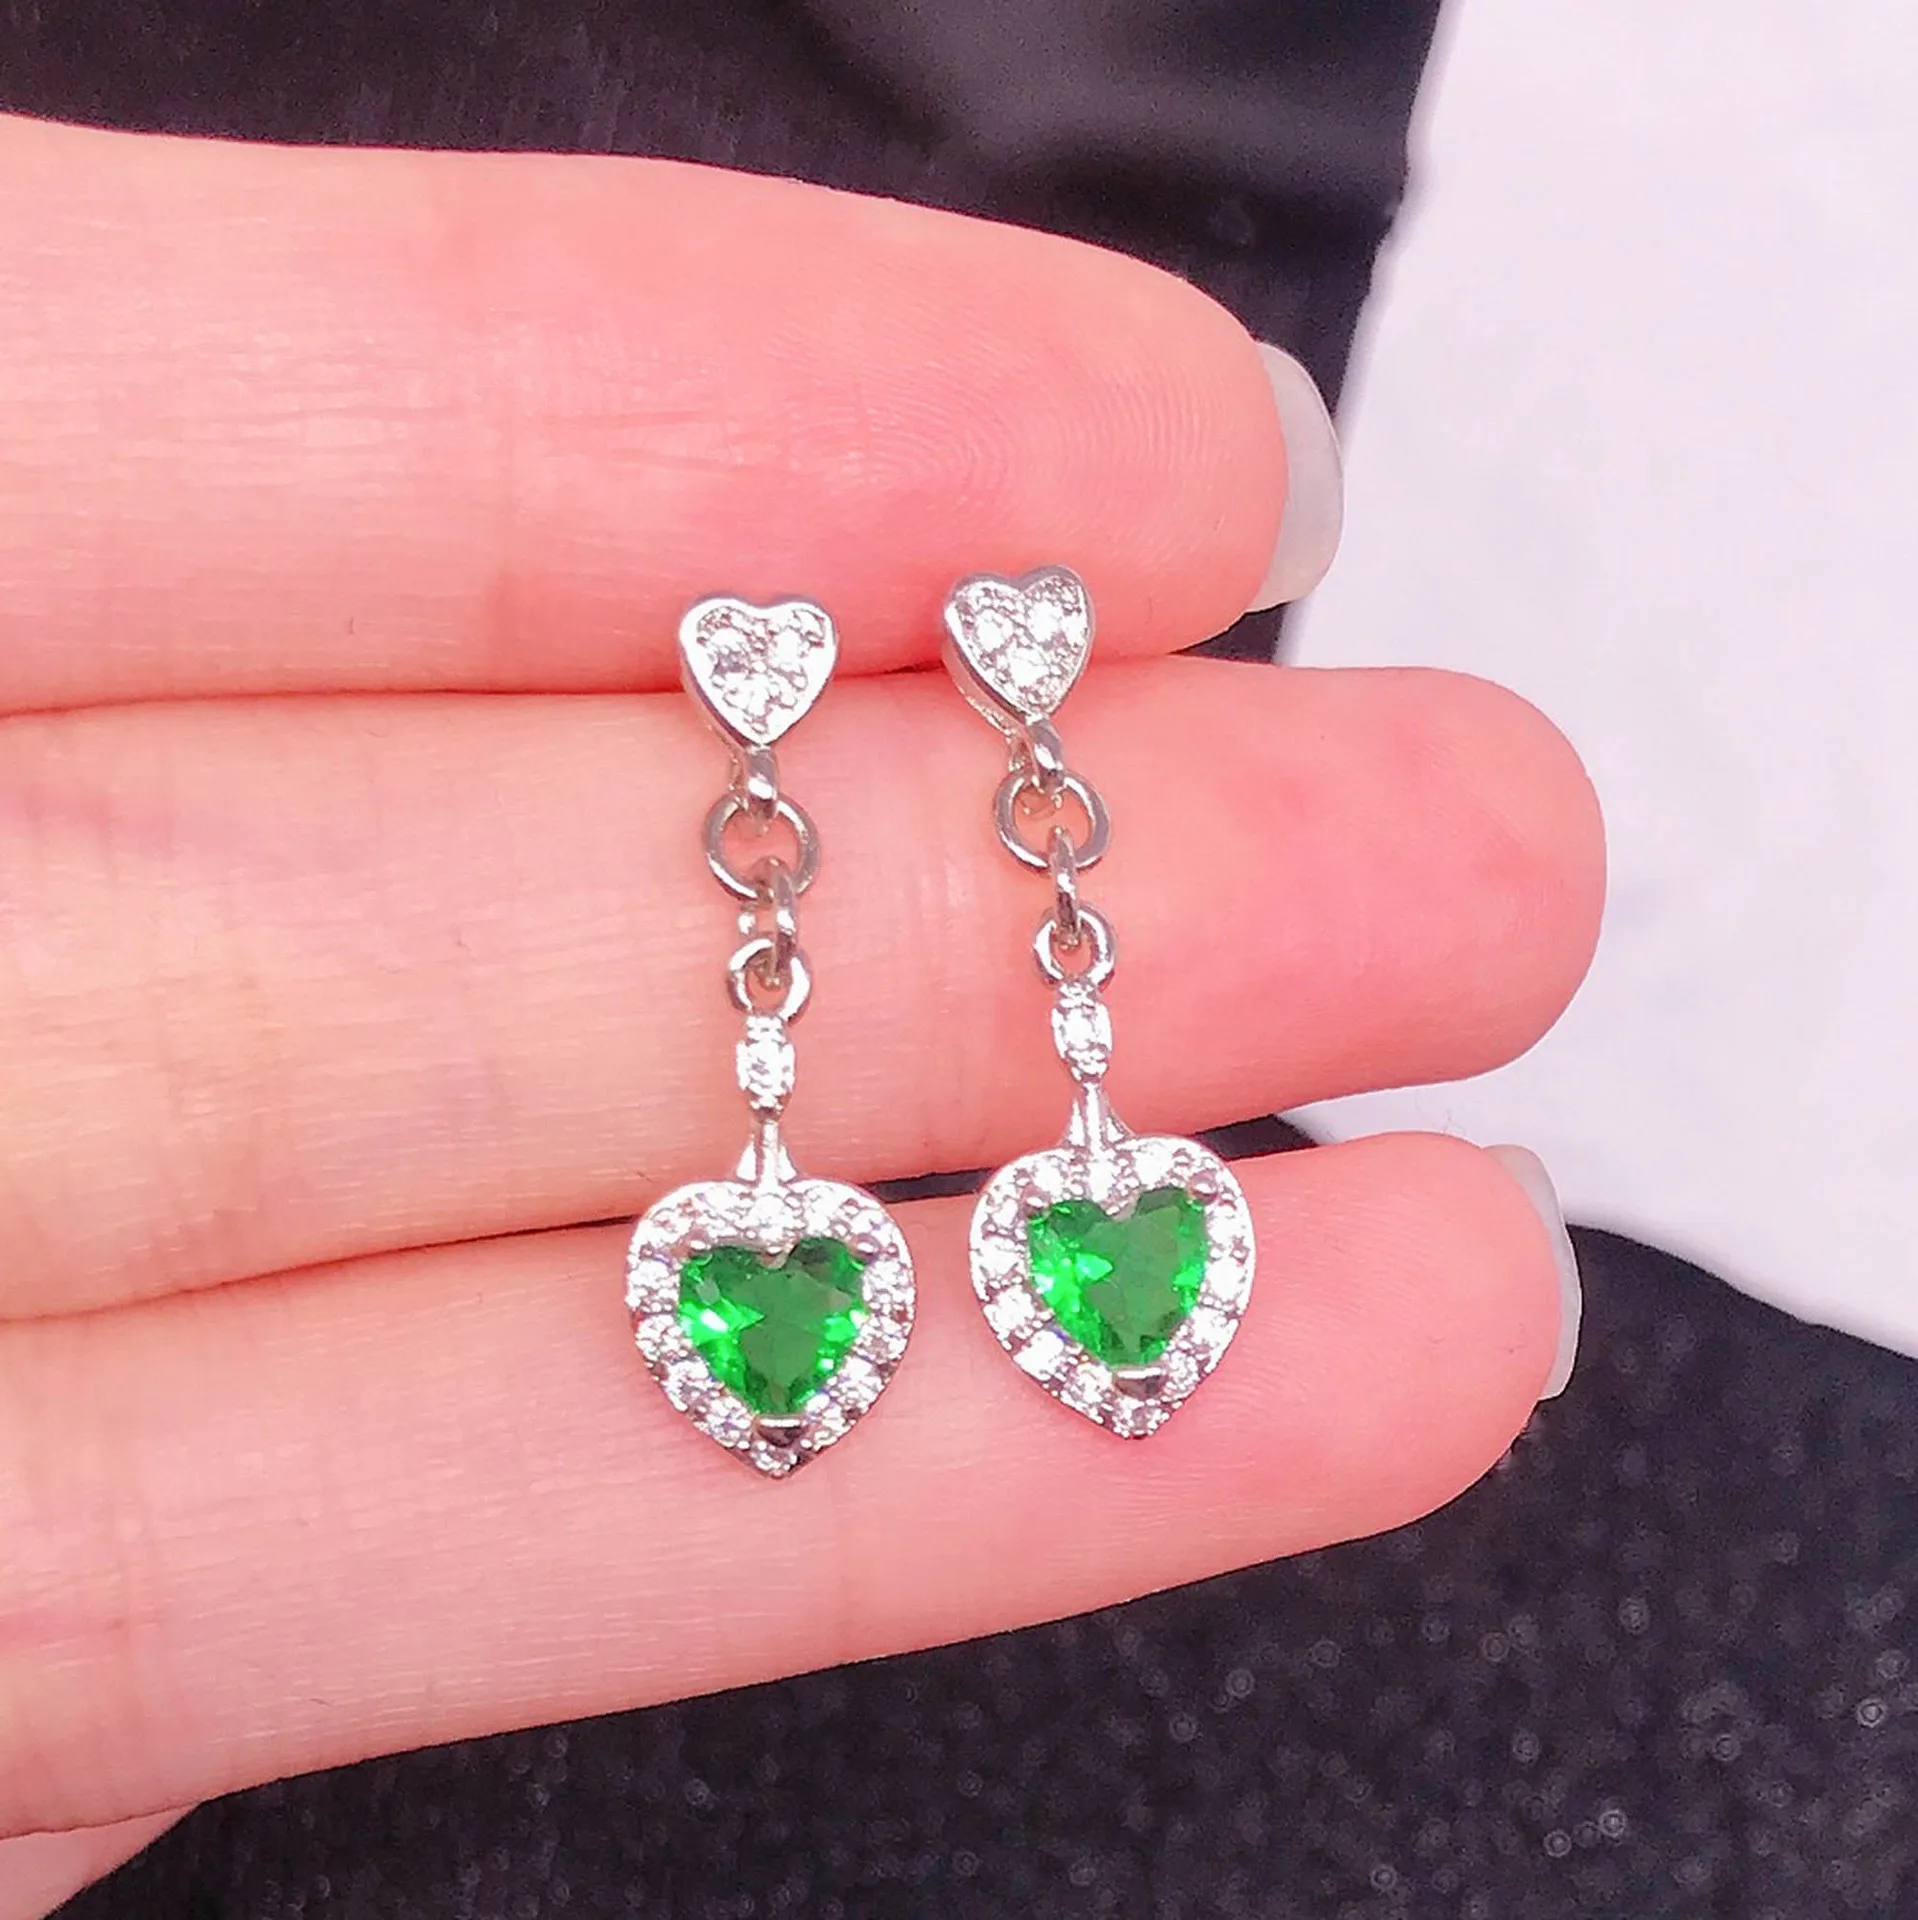 

Luxury Female Heart Shape Lab Emerald Drop Earrings Fashion SSilver Color Dangle Long Earring Engagement Party Gifts、